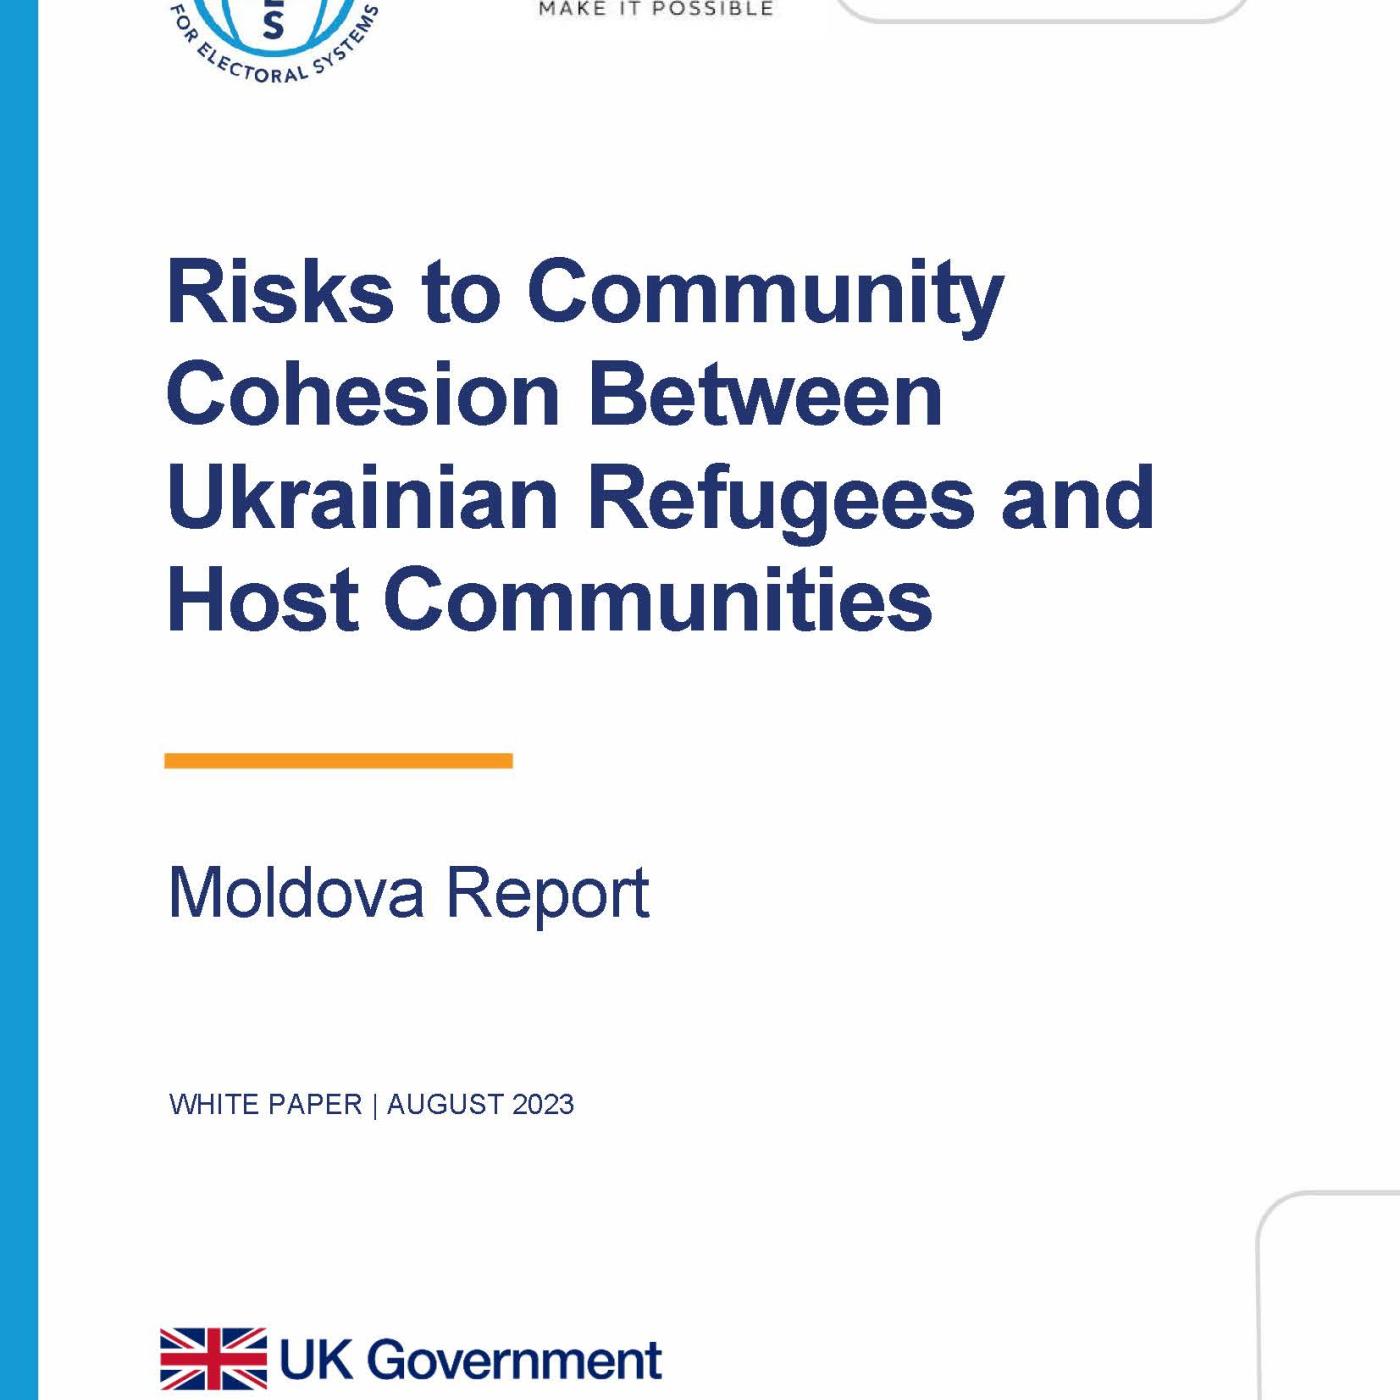 Cover page of the IFES-Palladium report on Community Cohesion between Ukraine refugees in Moldova.